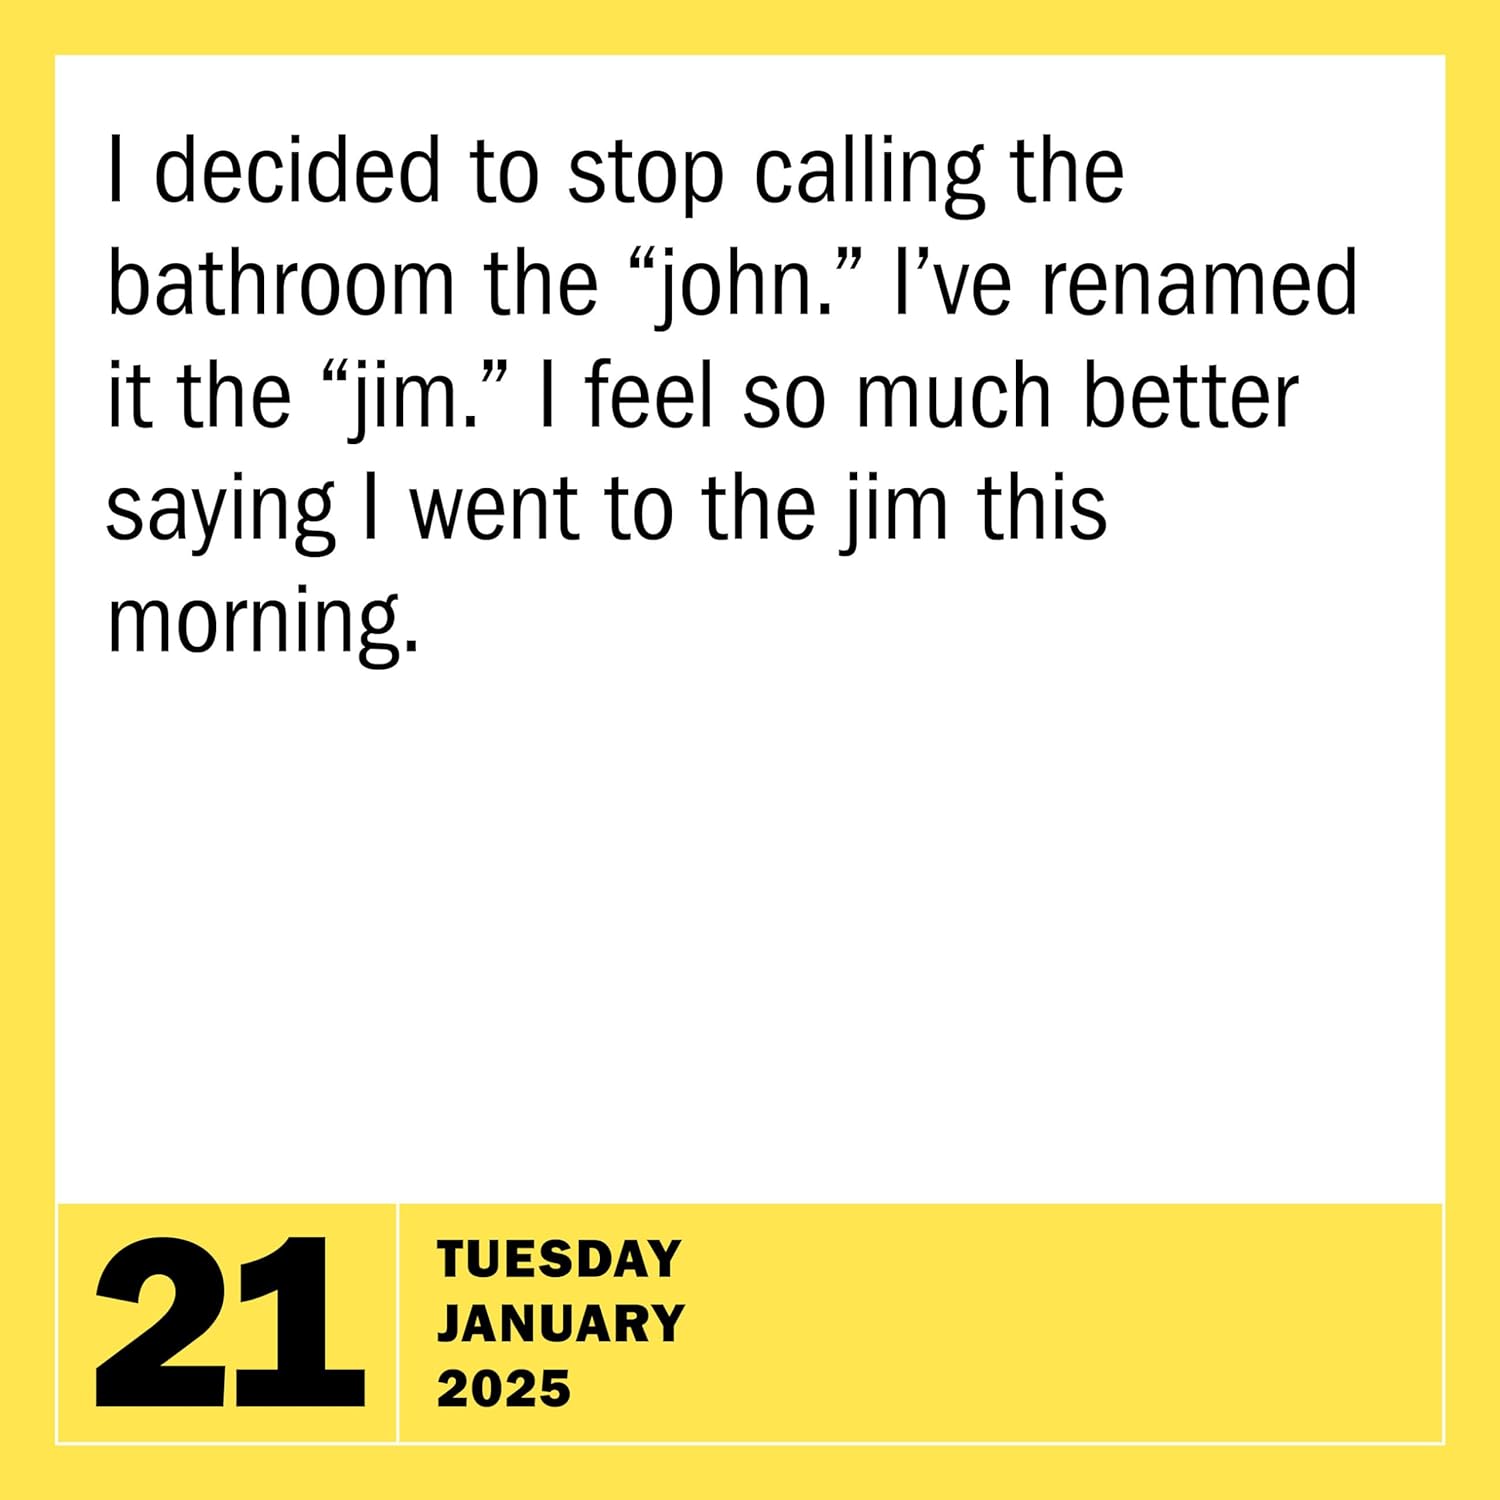 2025 290 Bad Jokes & 75 Punderful Puns - Daily Boxed Page-A-Day Calendar